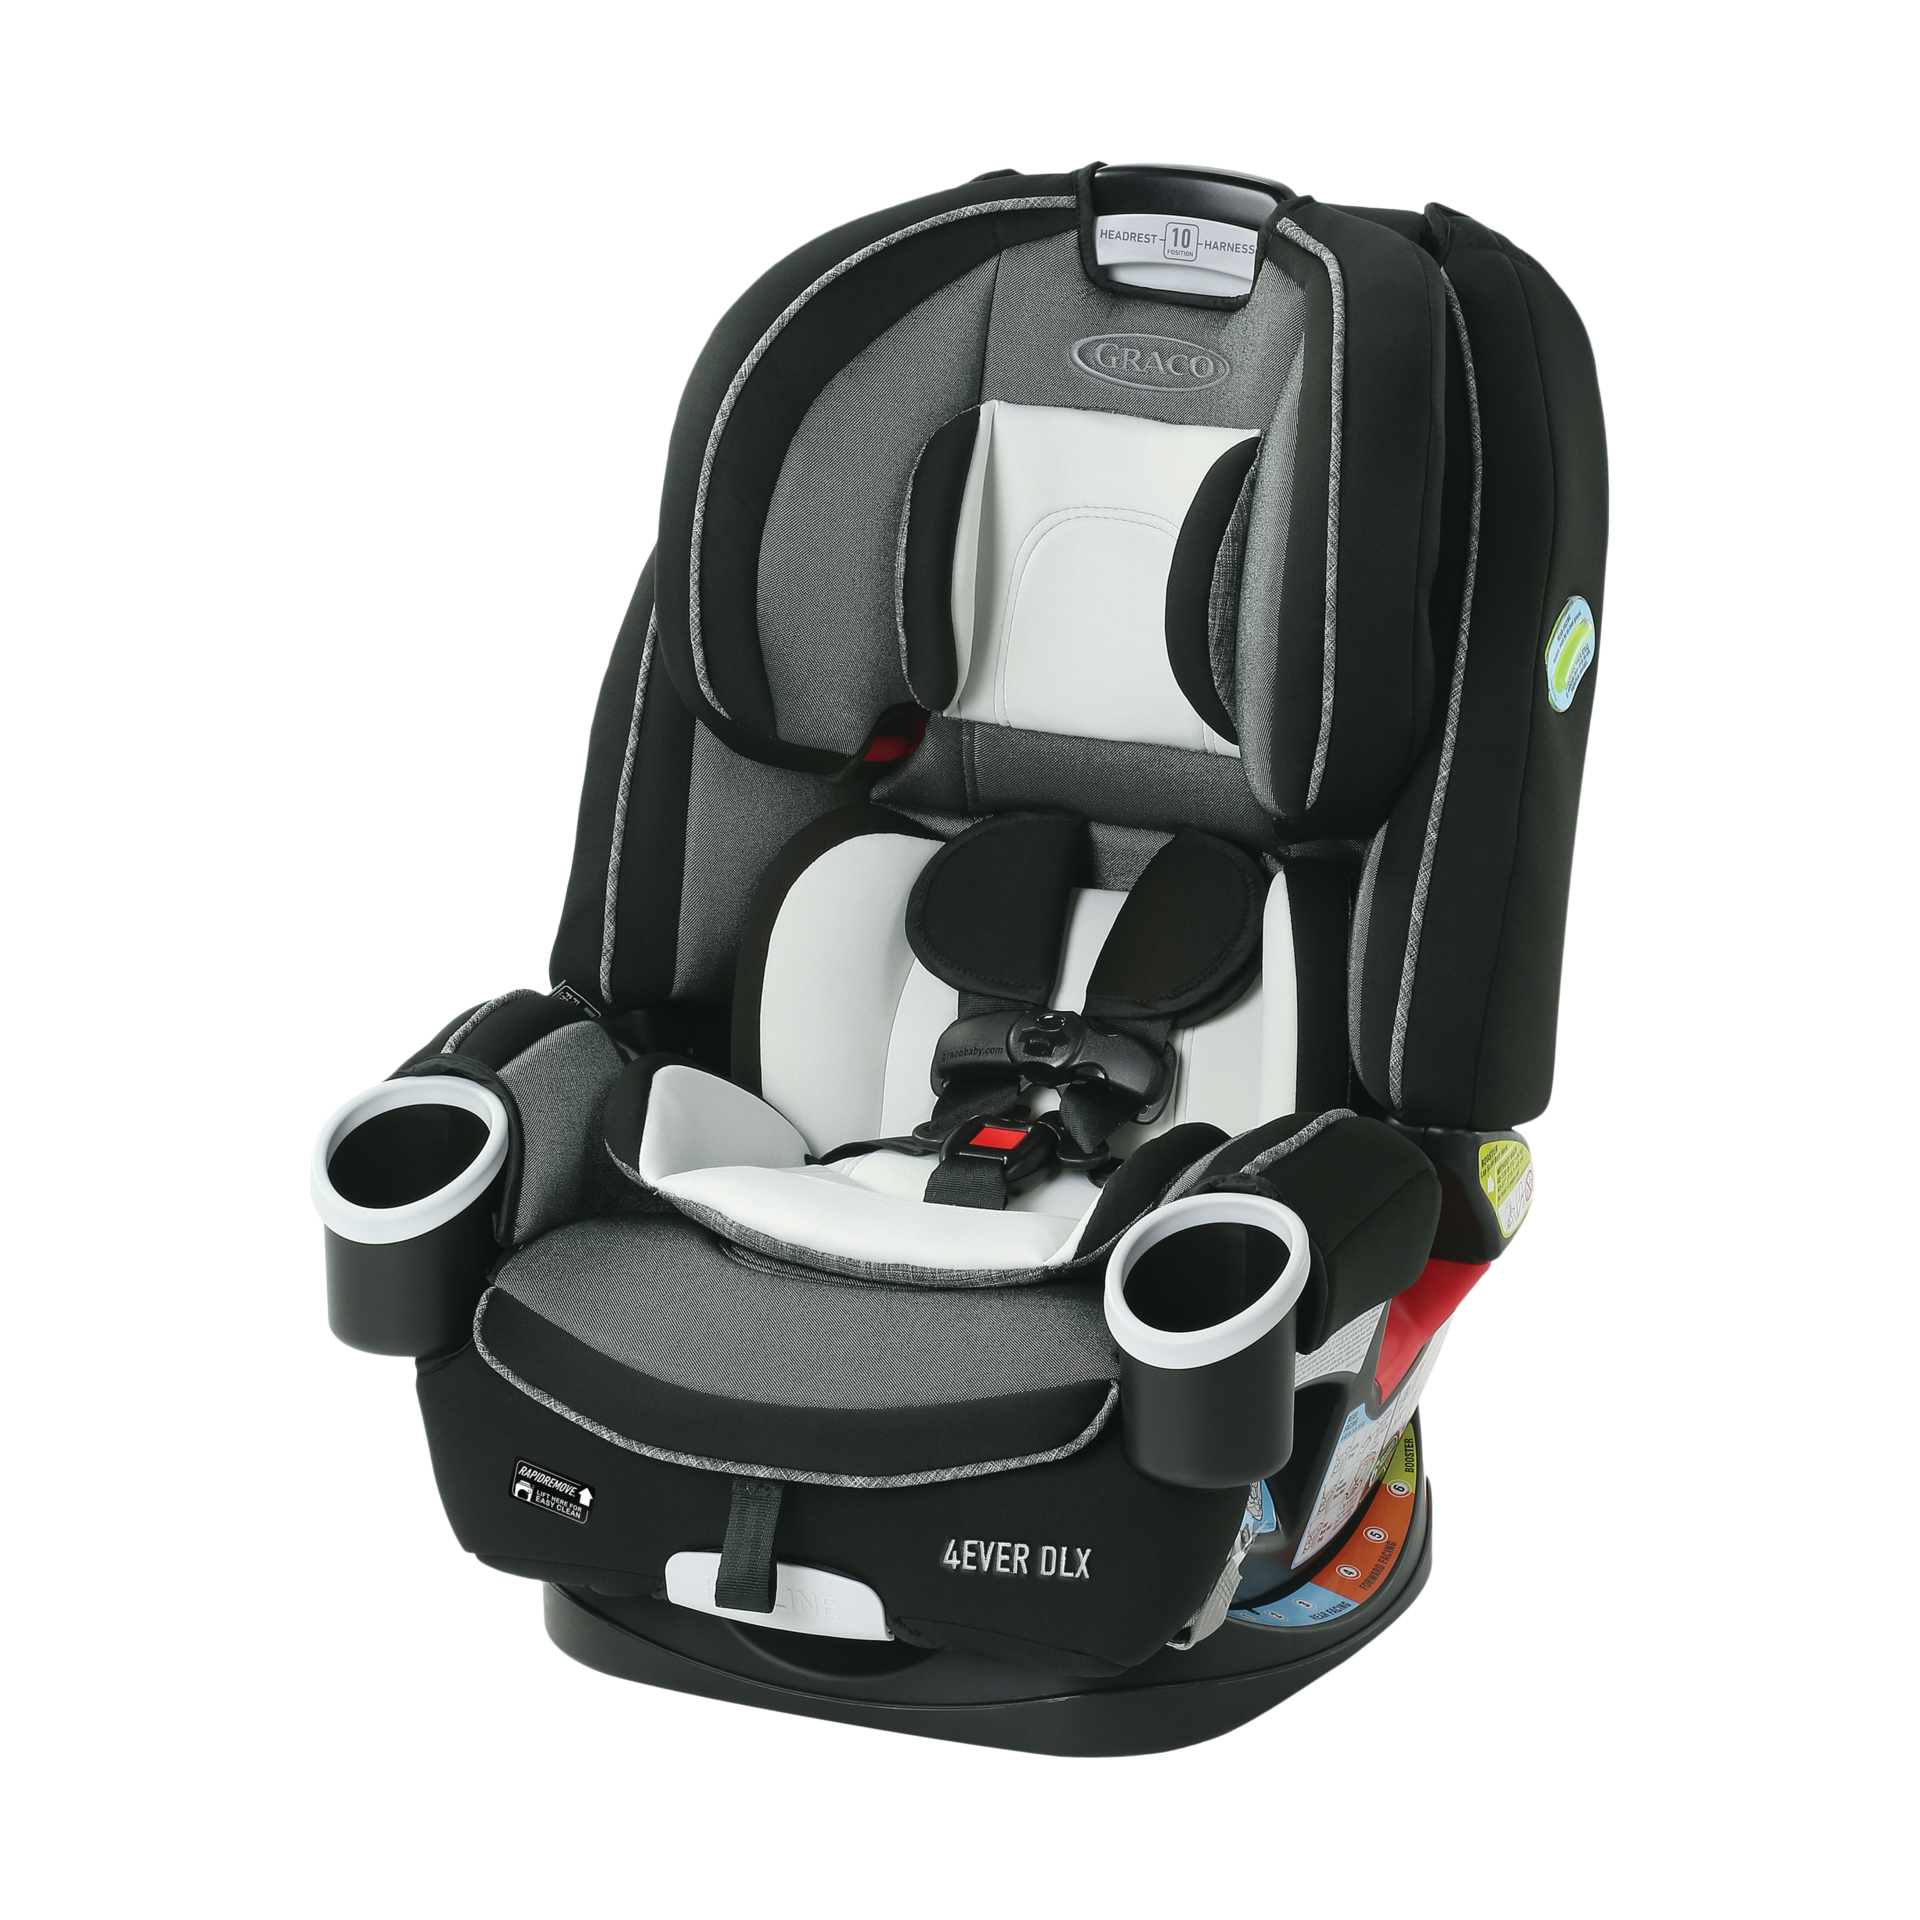 baby car seat with cup holder